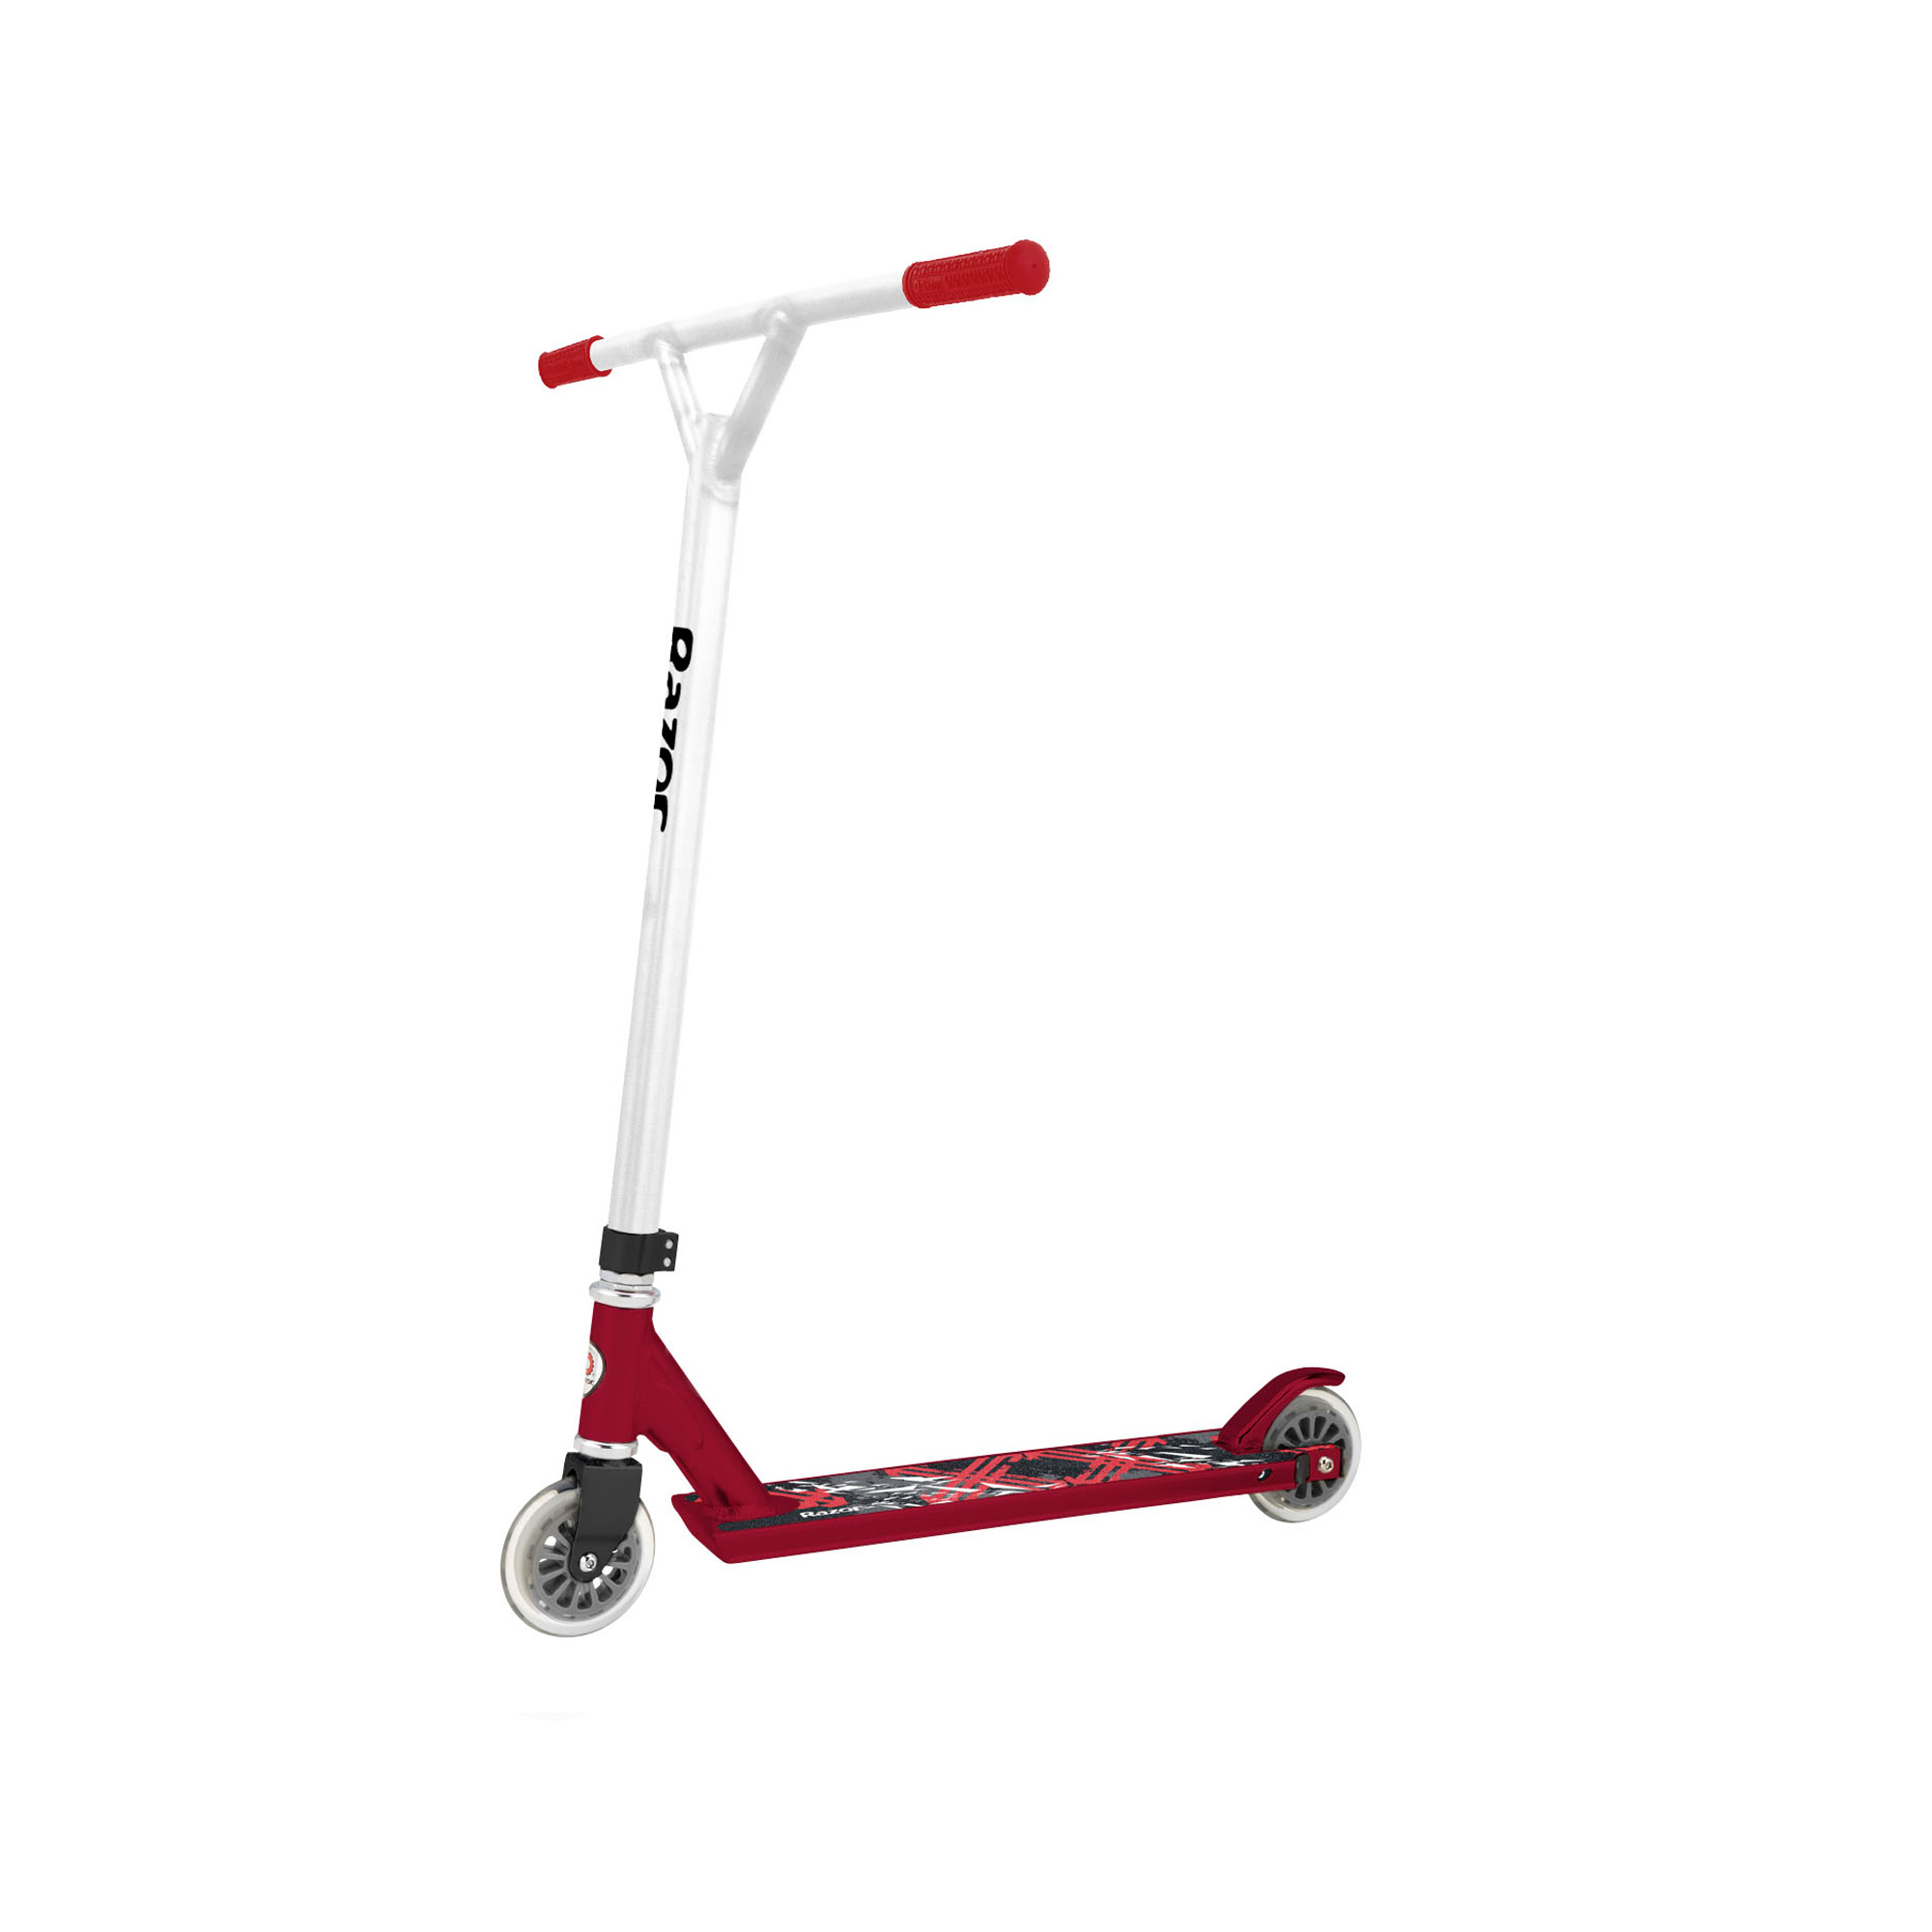 Pro XX Stunt Scooter - Red & White